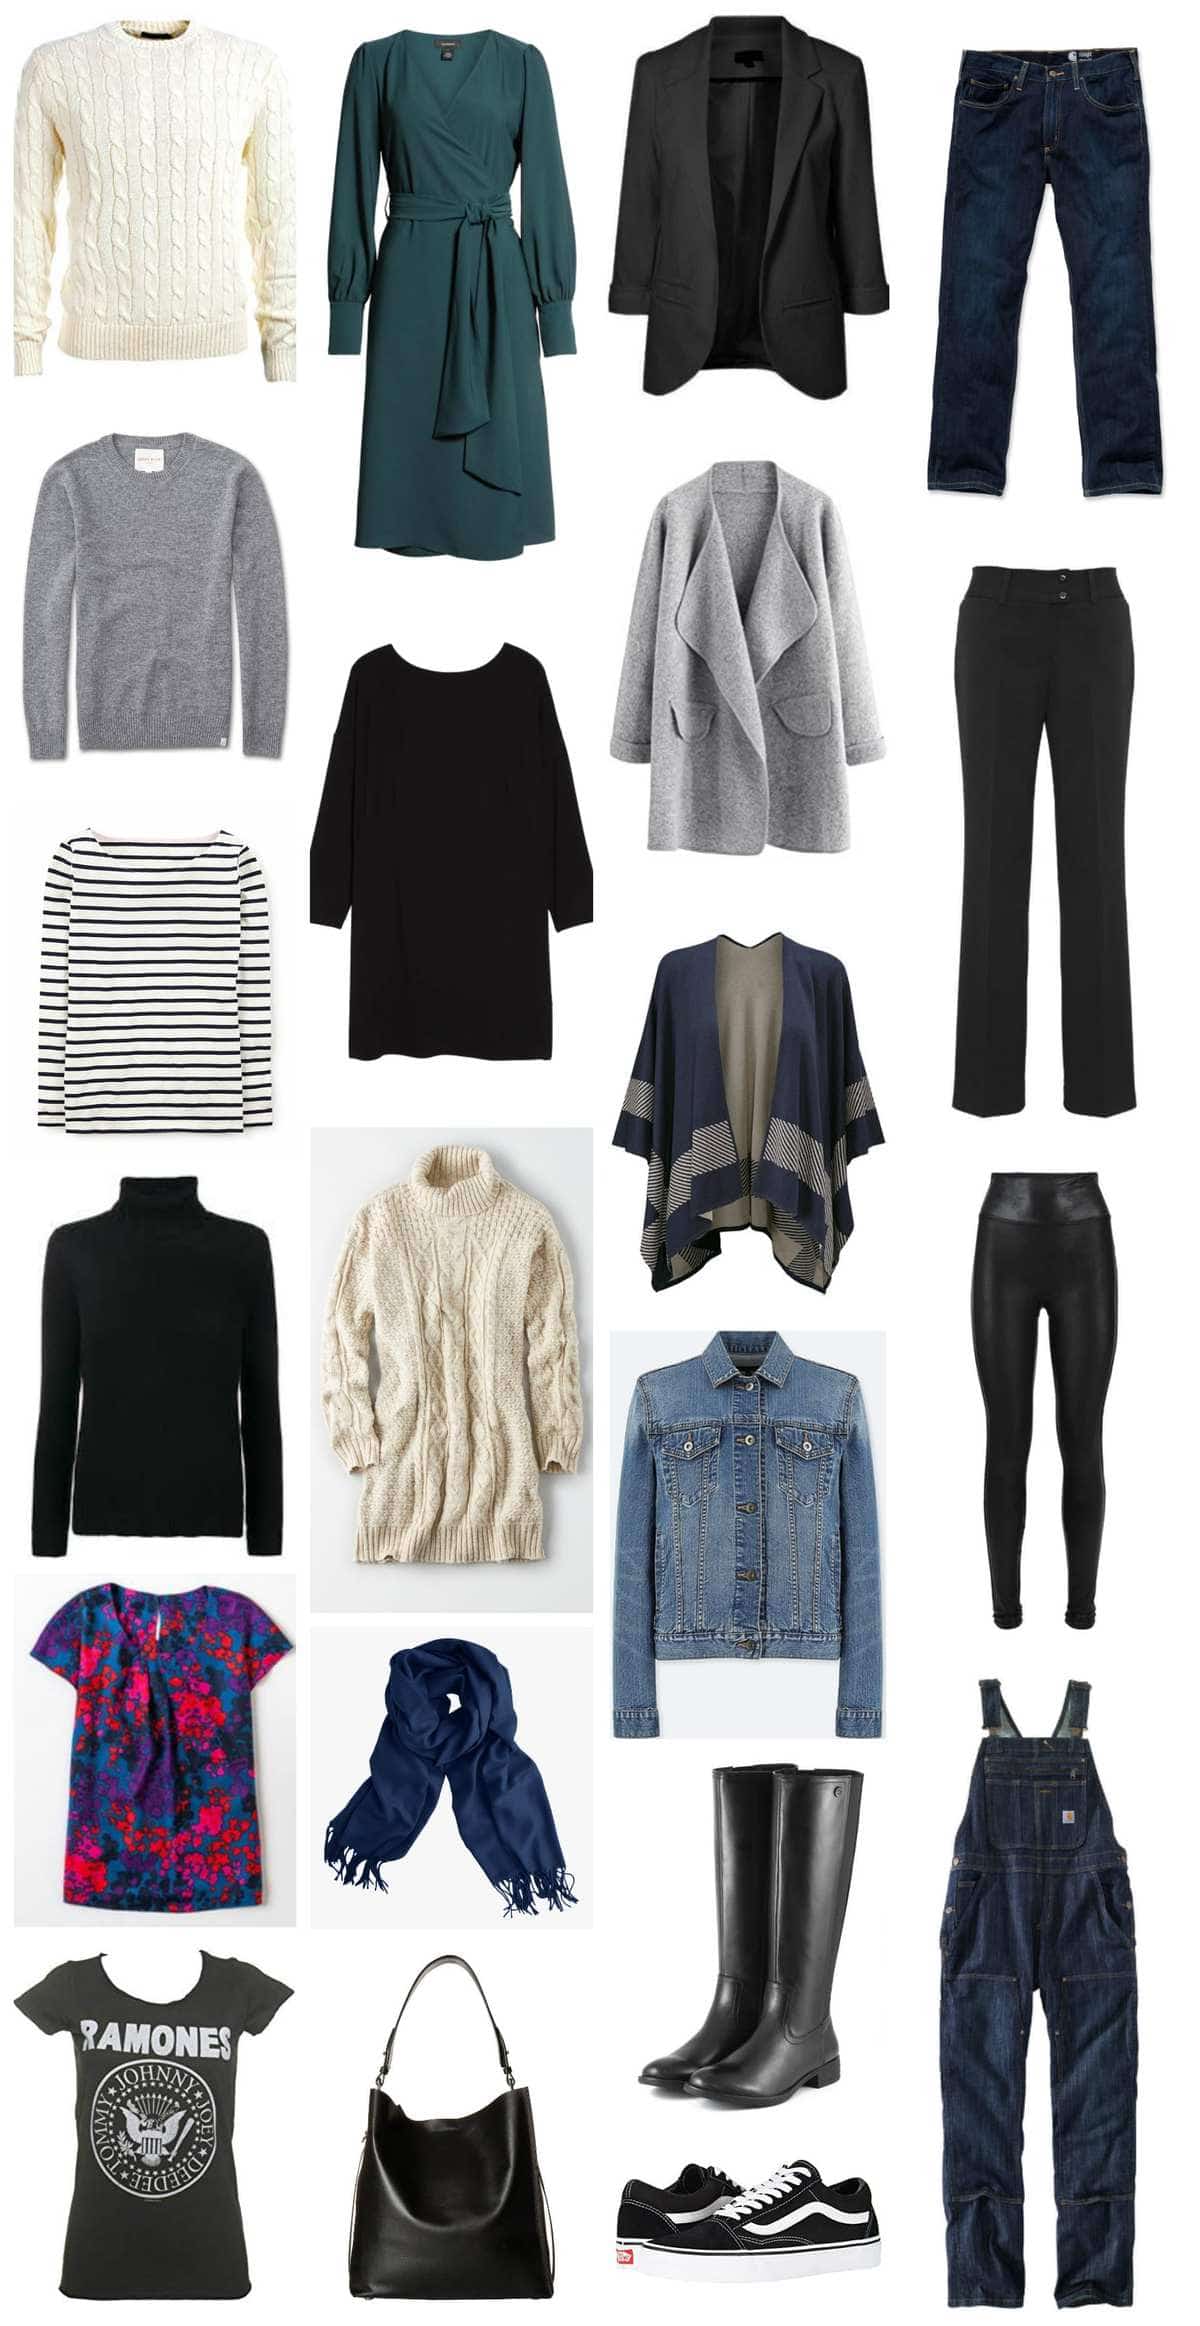 A casual capsule wardrobe for fall into winter. Click for tips on how to create over 45 outfits from this collection of pieces and how to accessorize.